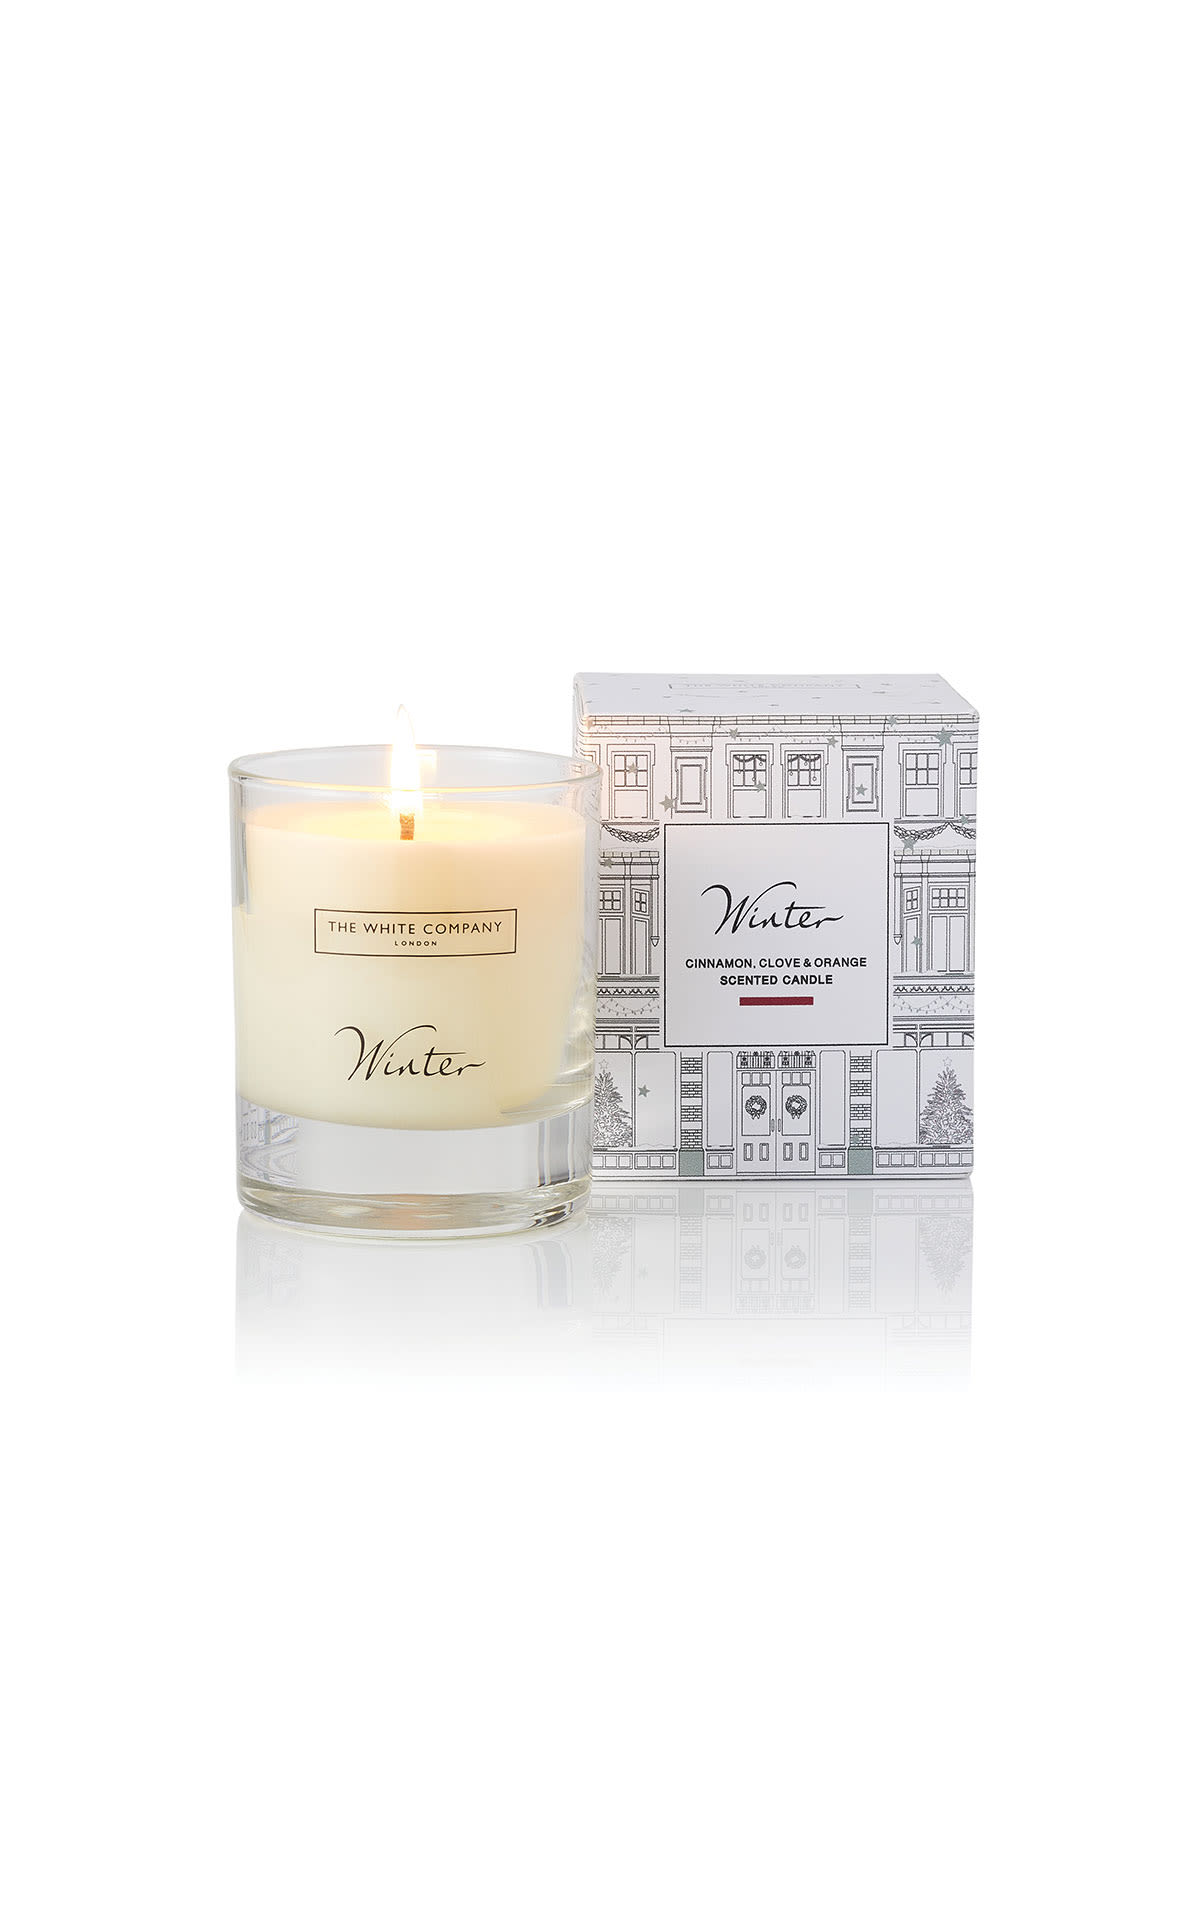 The White Company  Winter signature candle from Bicester Village